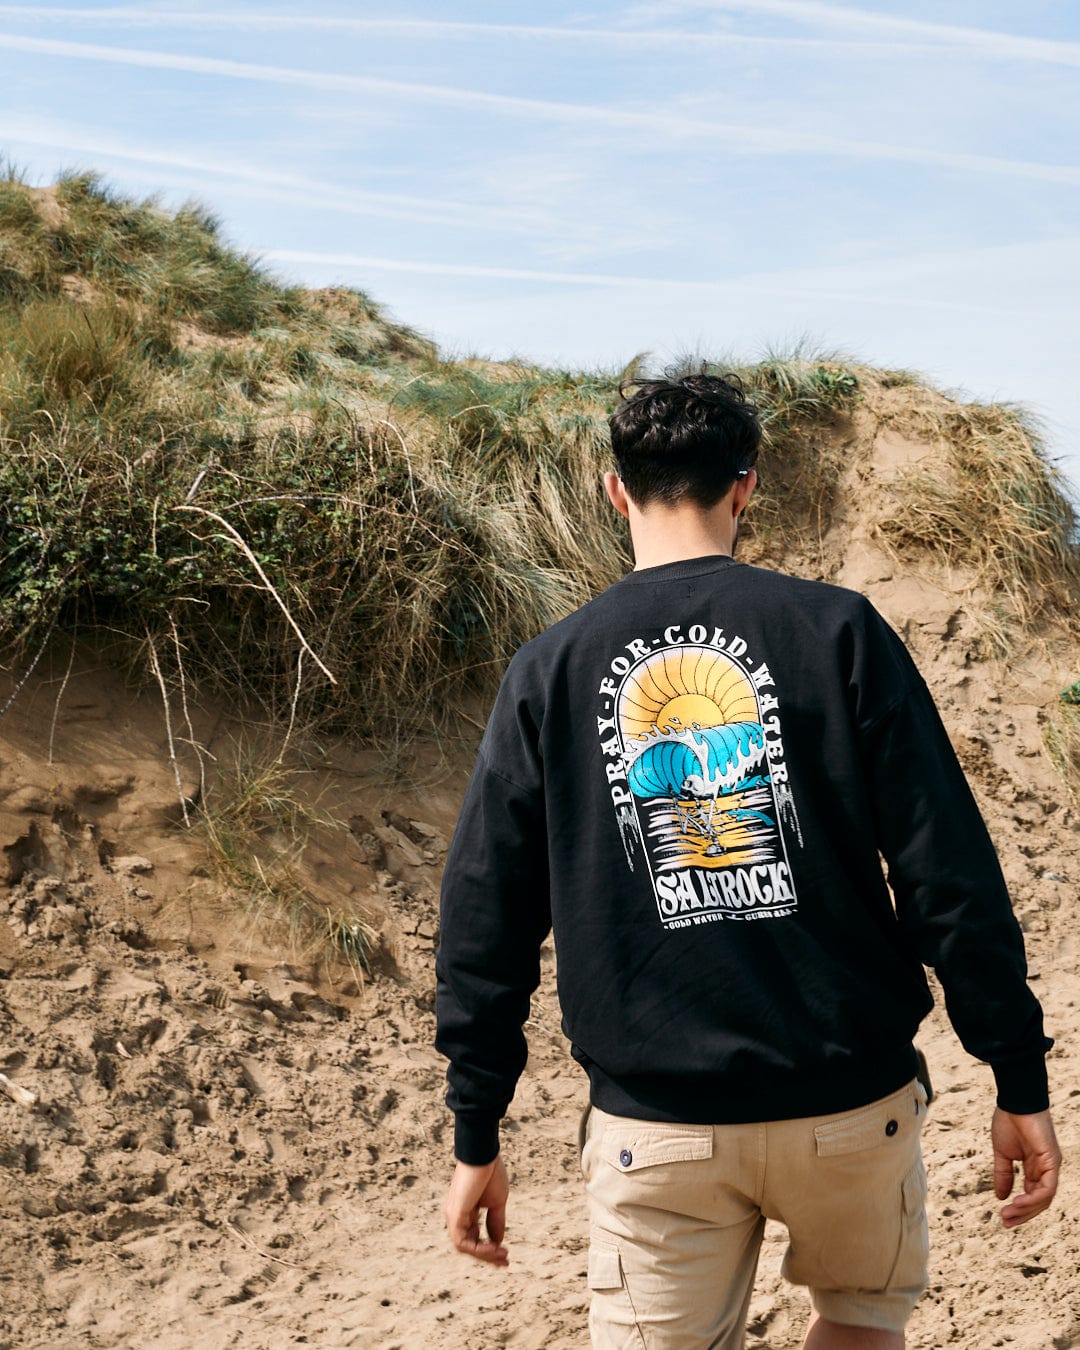 A man in a black Saltrock Cold Water - Mens Sweat hoodie and khaki shorts viewing sand dunes, with his back to the camera.